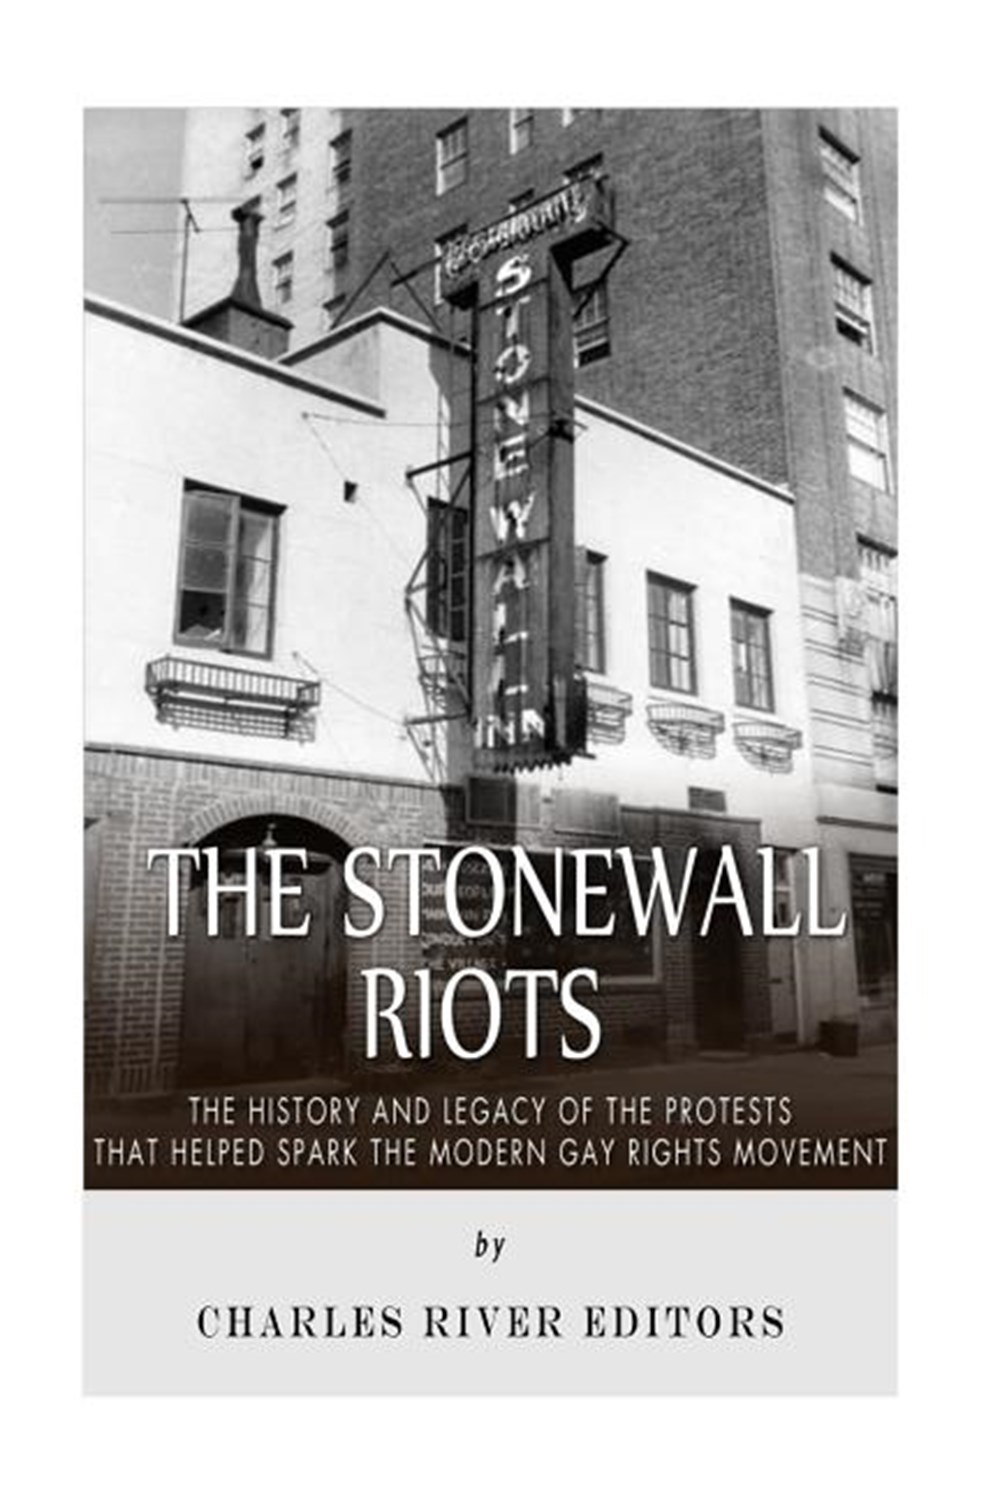 Stonewall Riots: The History and Legacy of the Protests that Helped Spark the Modern Gay Rights Move